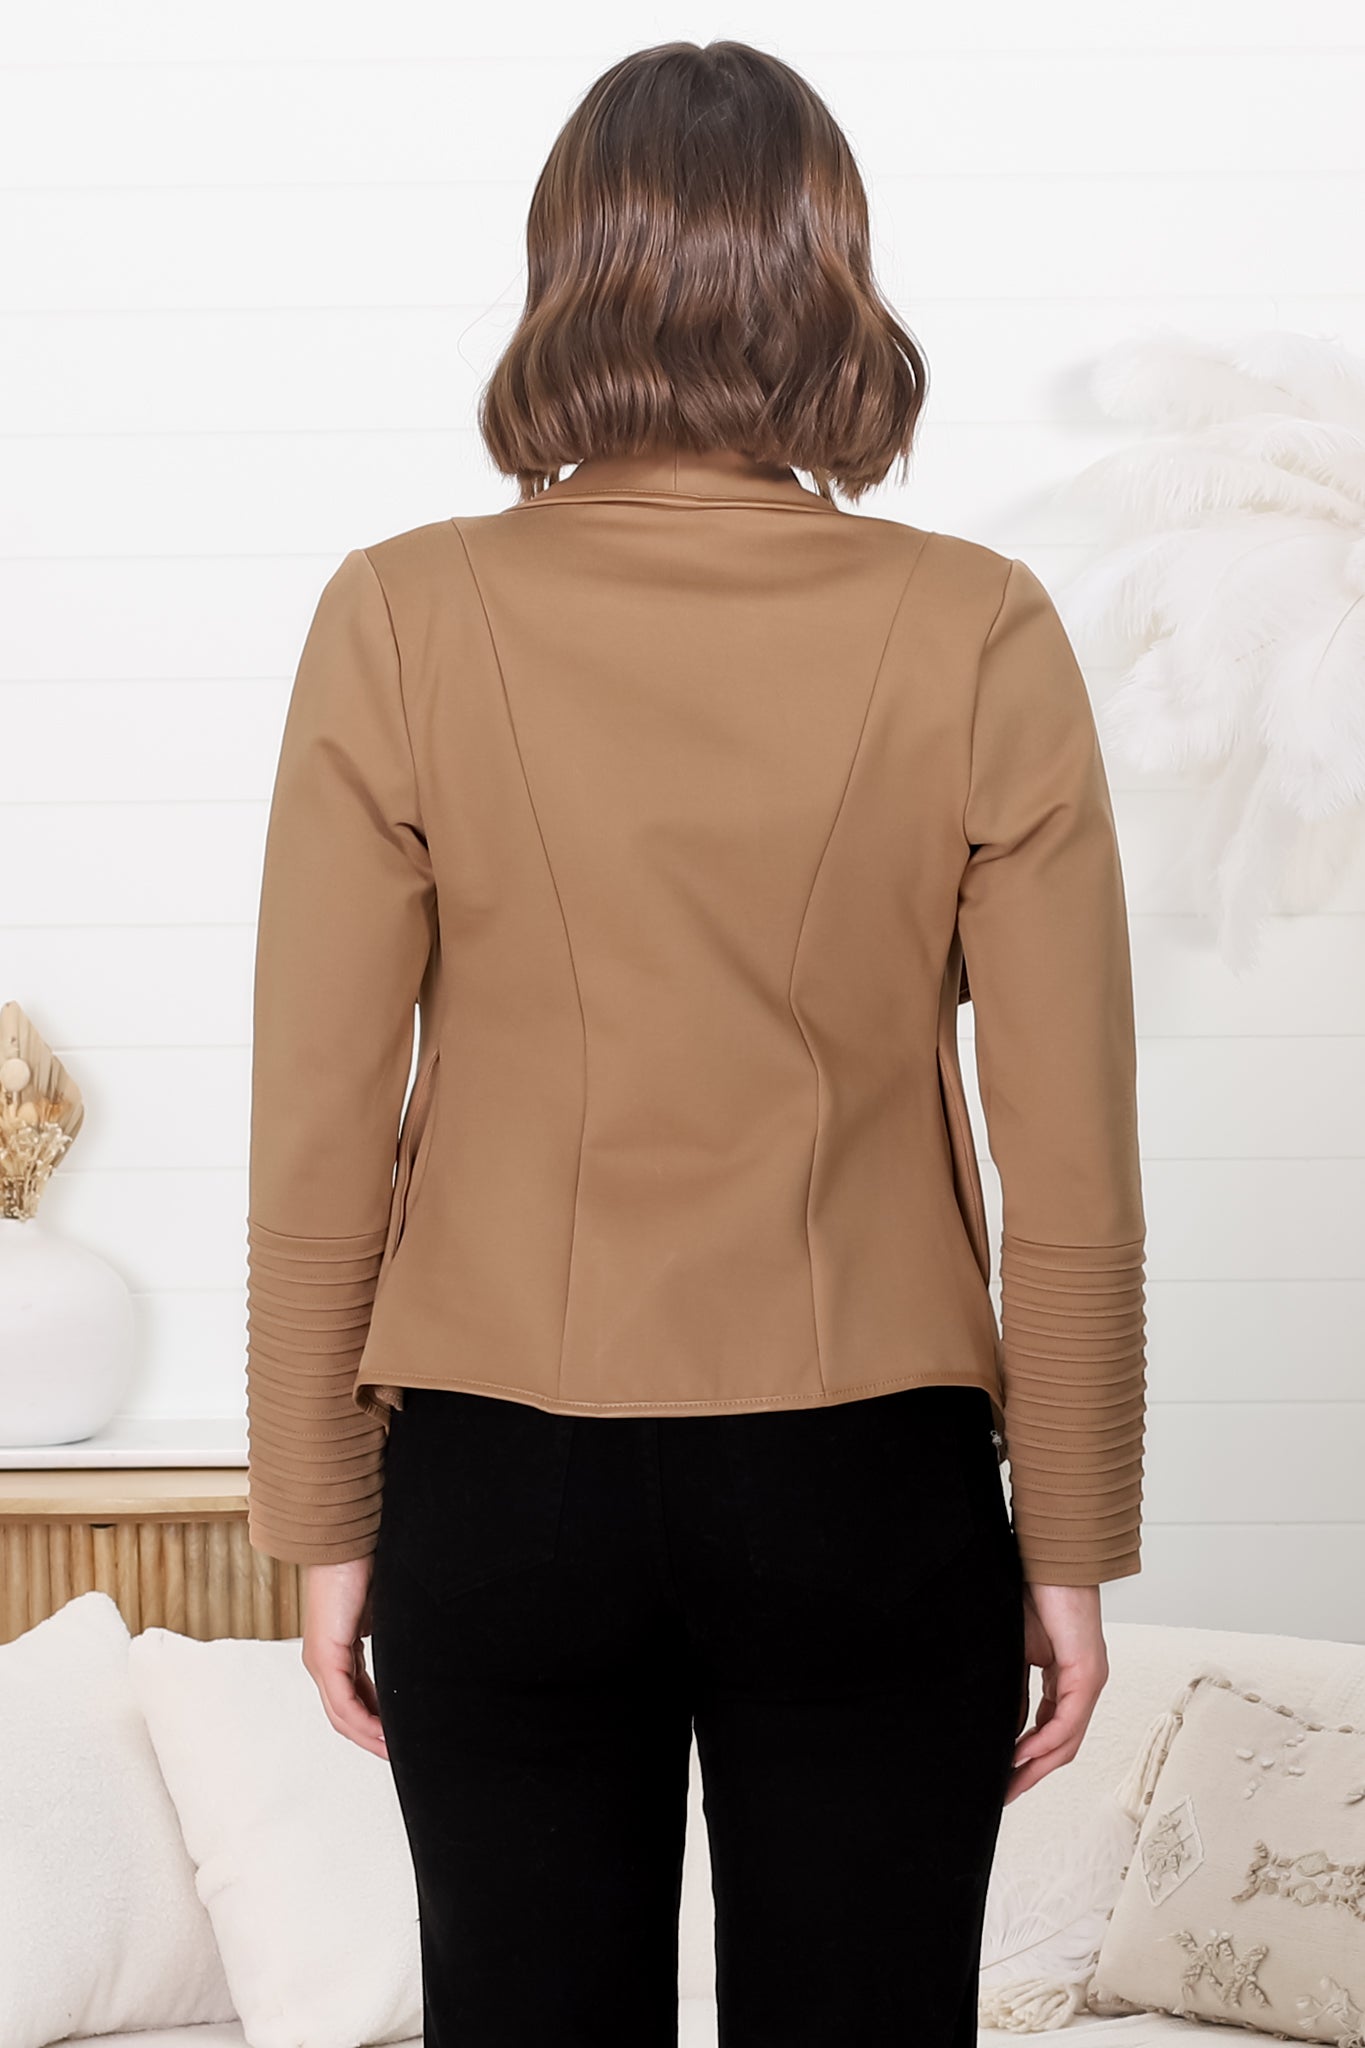 Marlyn Jacket - Faux Leather Trim Lapel Collar Jacket with Pintuck Detailed Sleeves in Camel